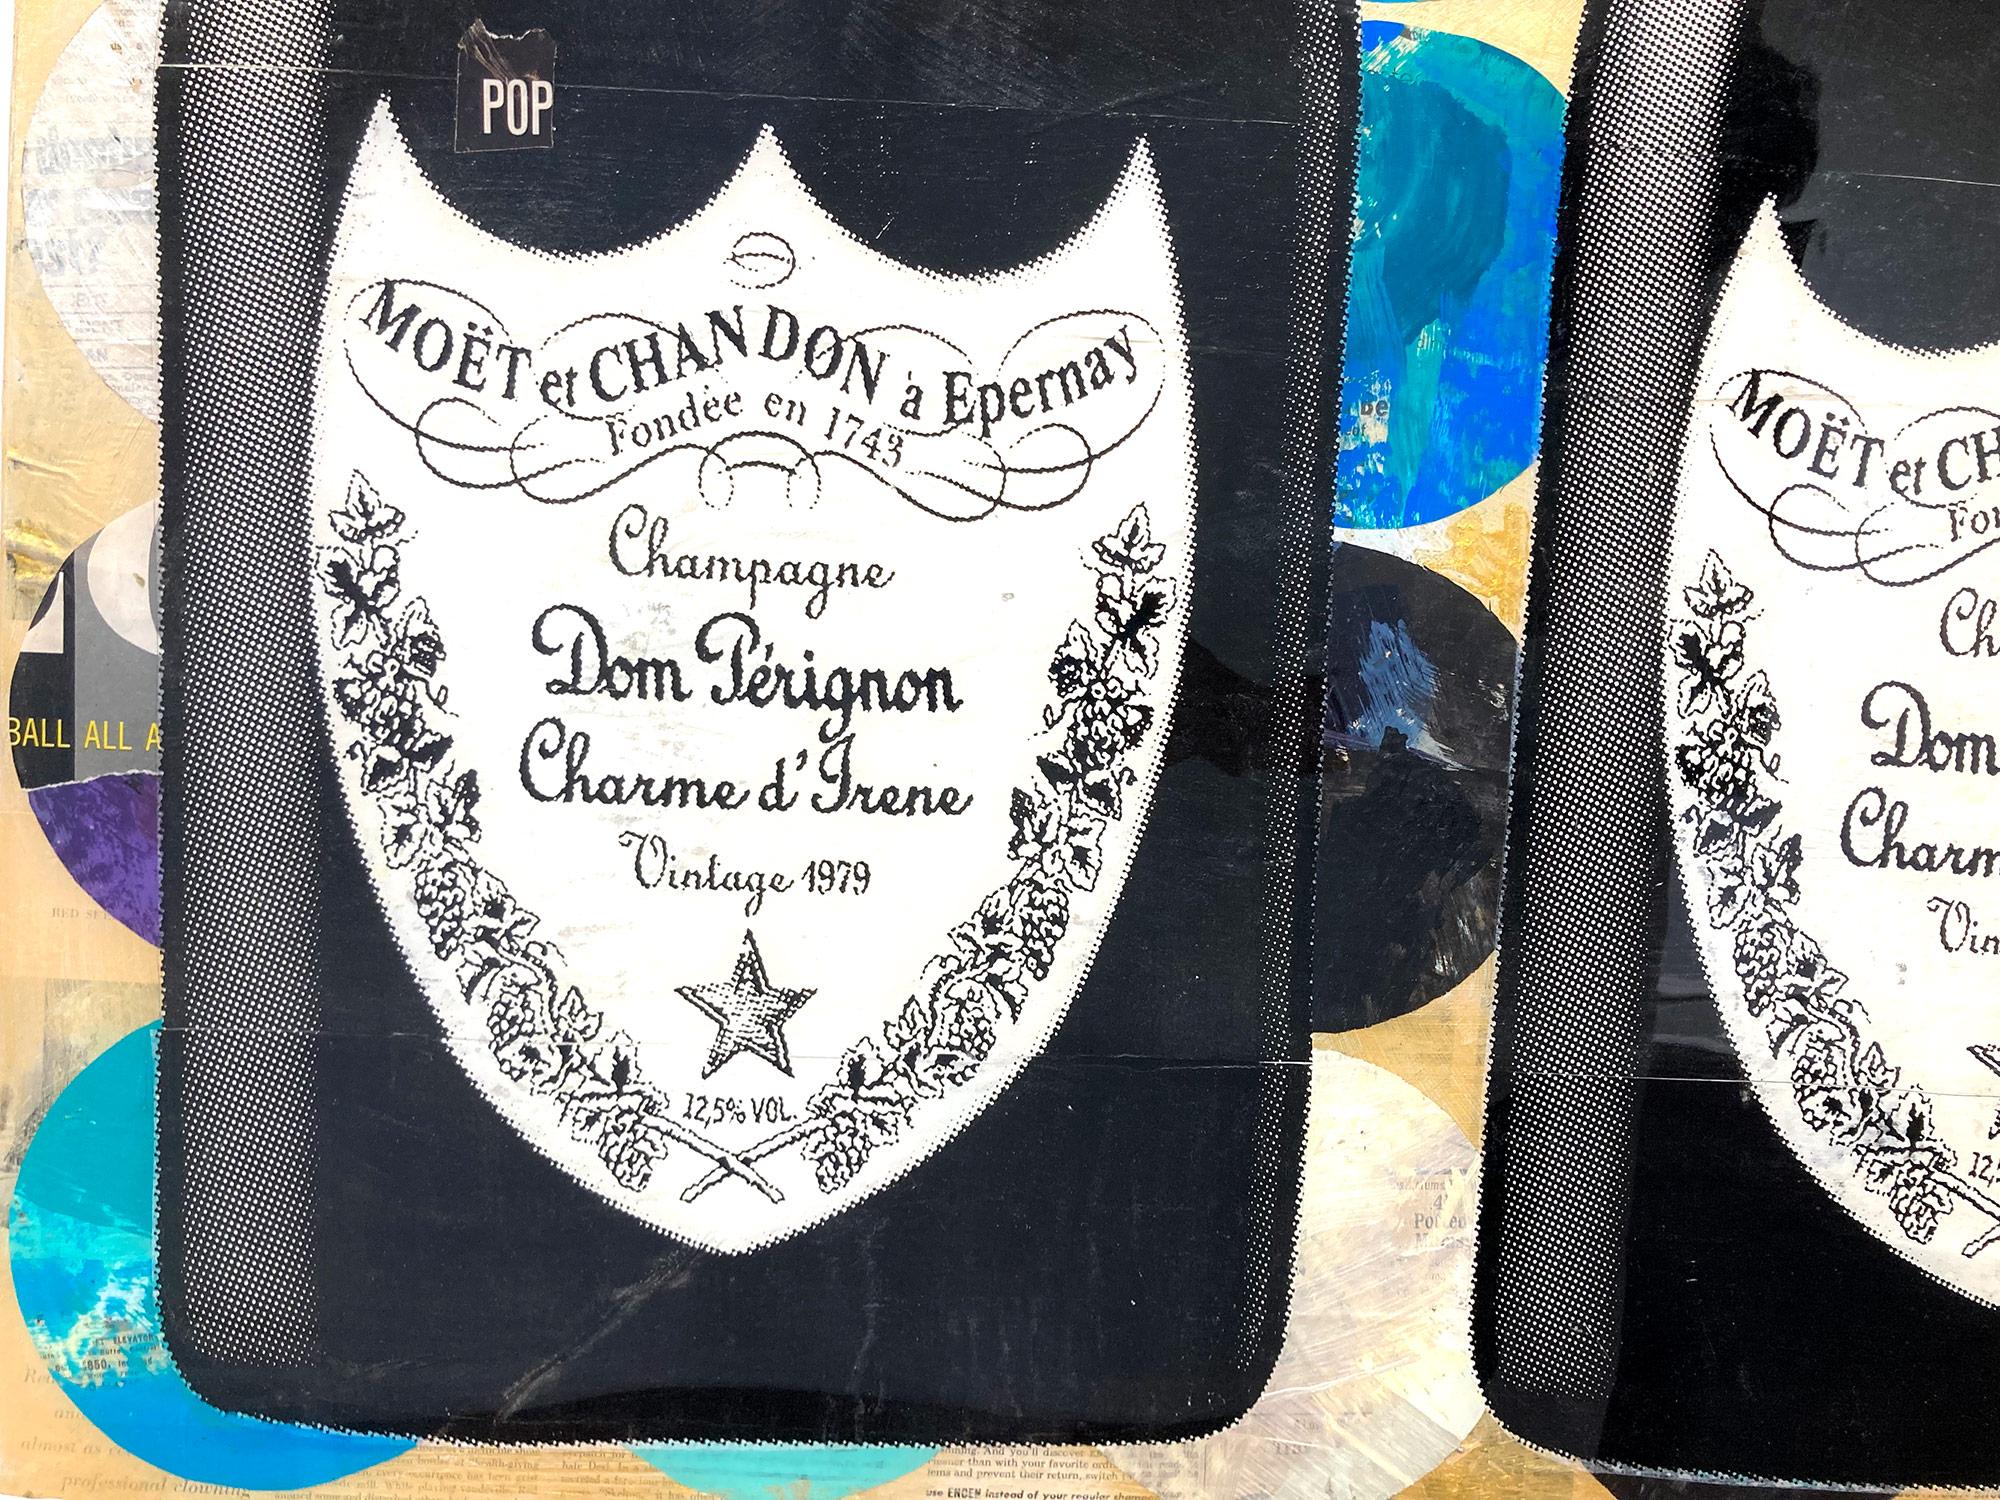 This piece depicts the famous Dom Pérignon Champagne Bottle. Celebrating this iconic brand from the Golden Era with expressive and bold colors by capturing these moments in history, his paintings serve as vehicles for bringing the nostalgia of this